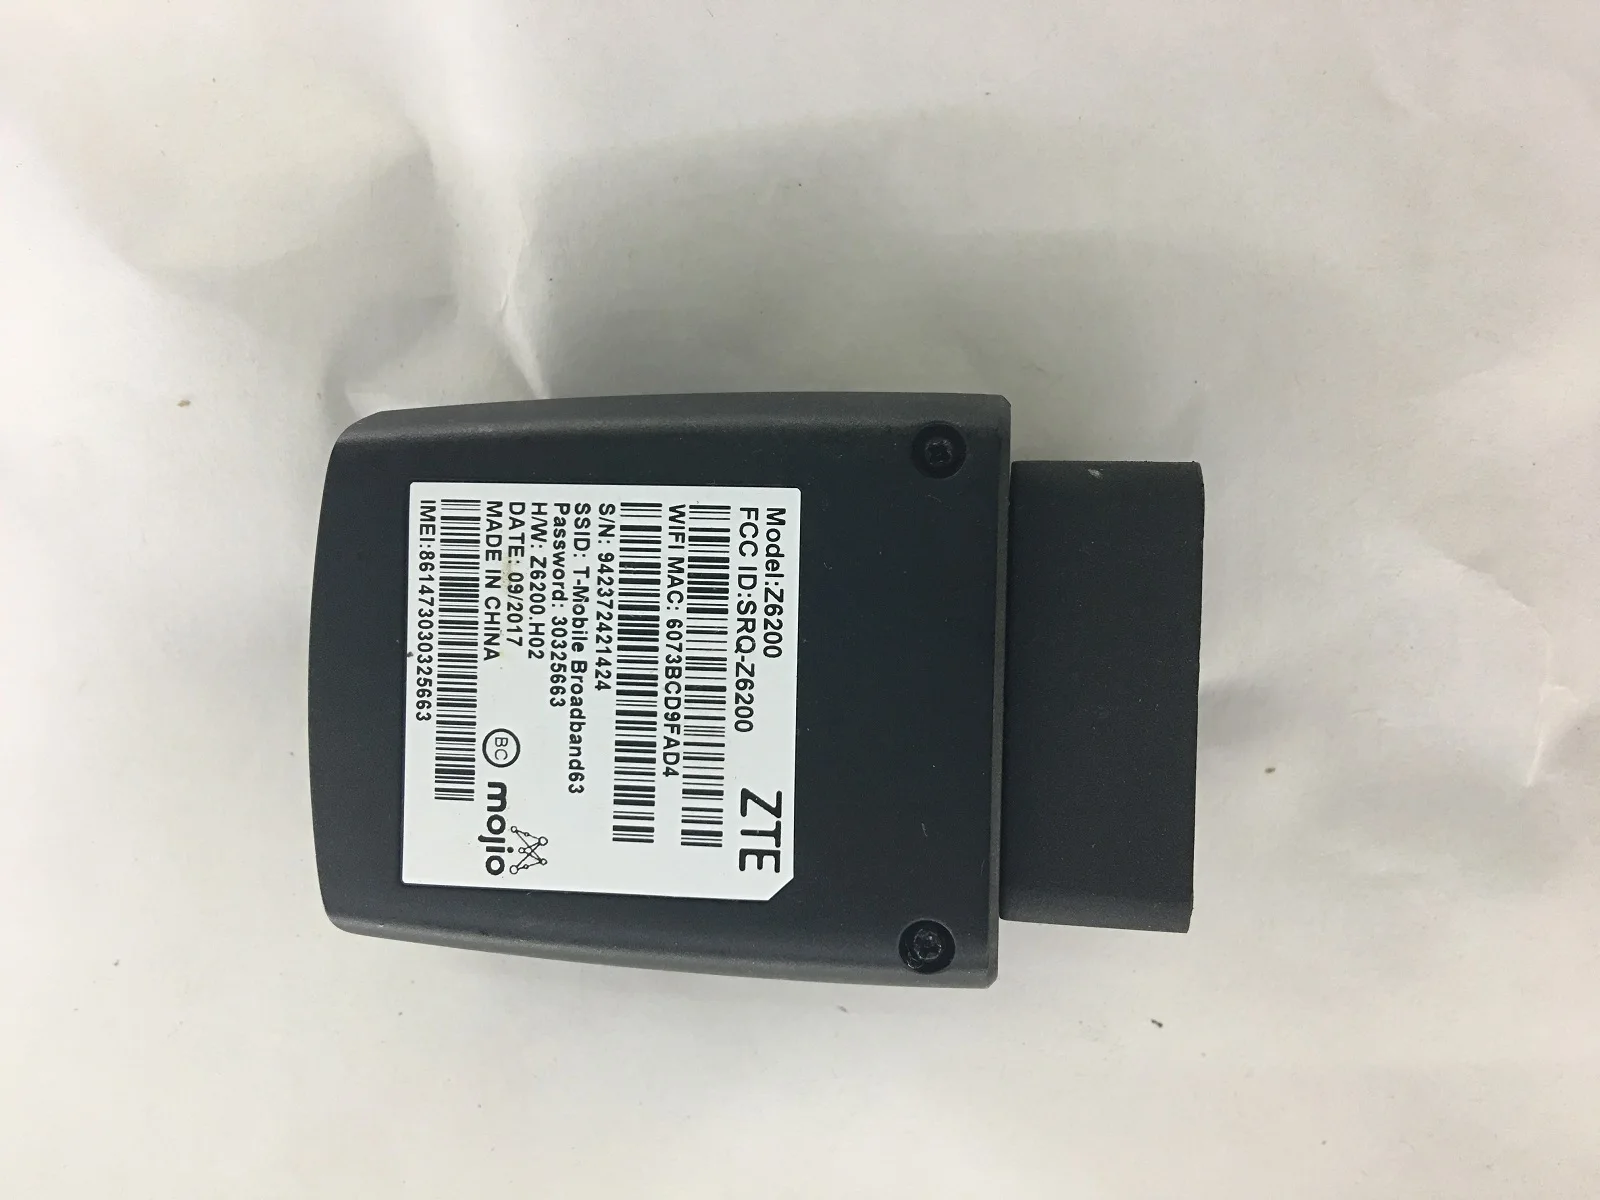 Connected Car OBD II T-Mobile ZTE Z6200 SyncUP Drive 4G LTE WiFi Hotspot